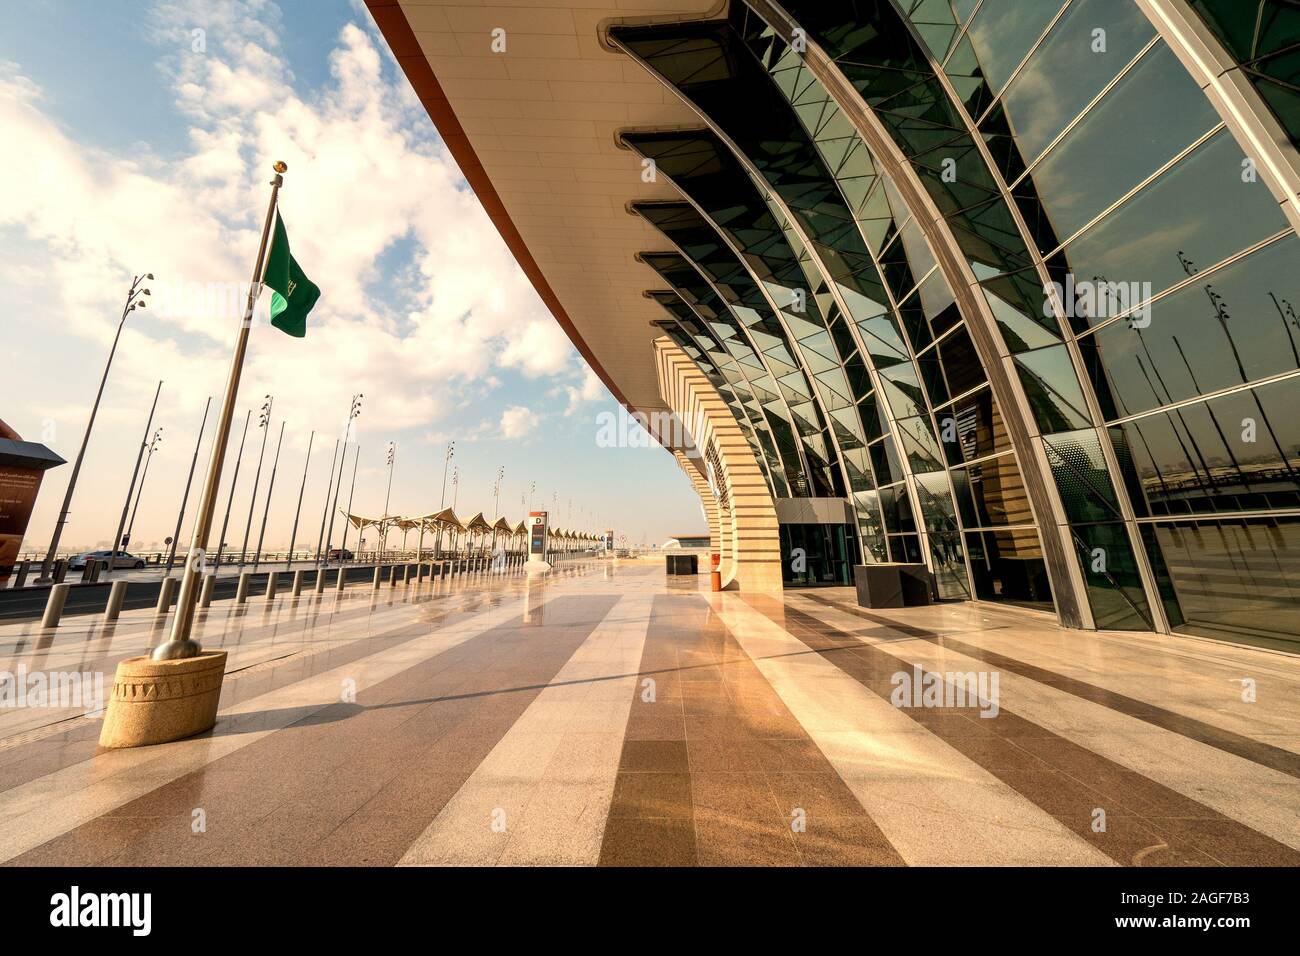 Saudi flag waving in the wind in front of the brand new Terminal 1 at the King Abdulaziz International Airport (JED) in Jeddah, Saudi Arabia Stock Photo